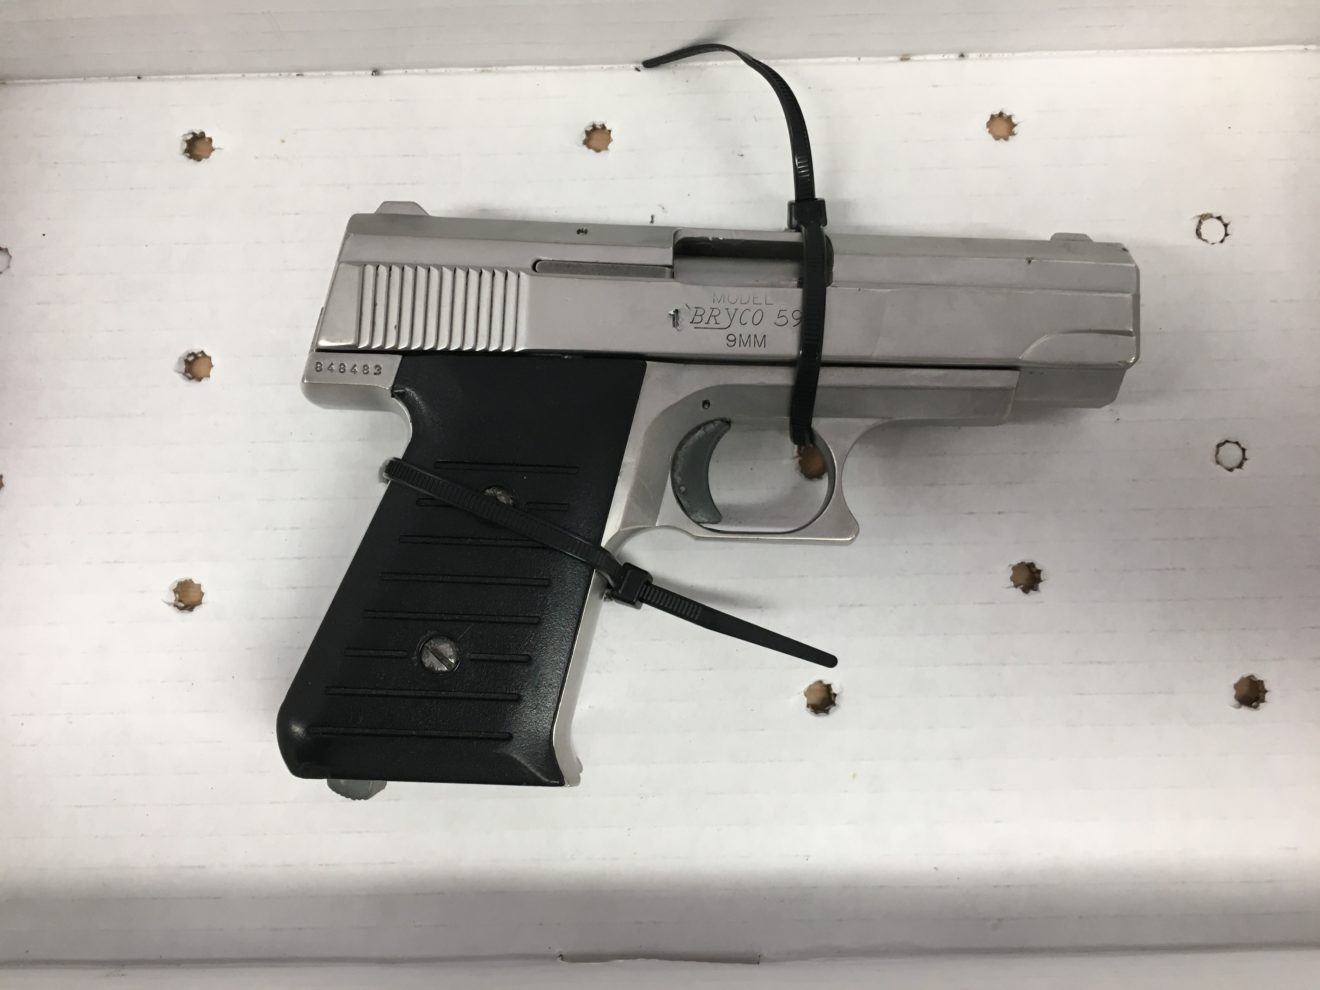 Methuen Police Arrest Three Juveniles, Recover Firearm after Report of Suspicious Activity